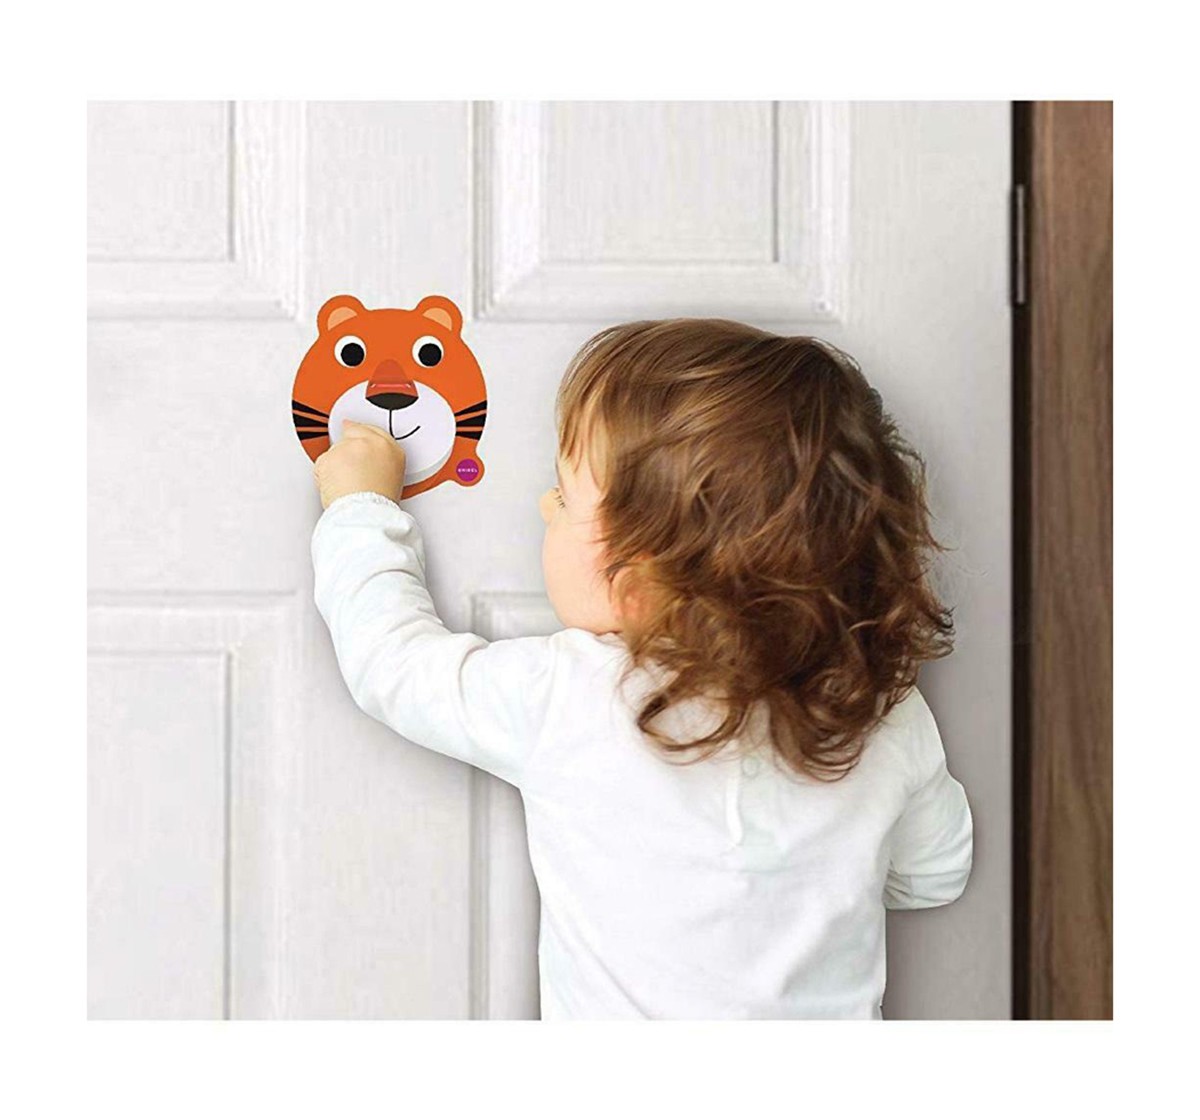 Vertiplay Wall Toy: Roarry Door Knocker Activity Toys for Kids age 9M+ 